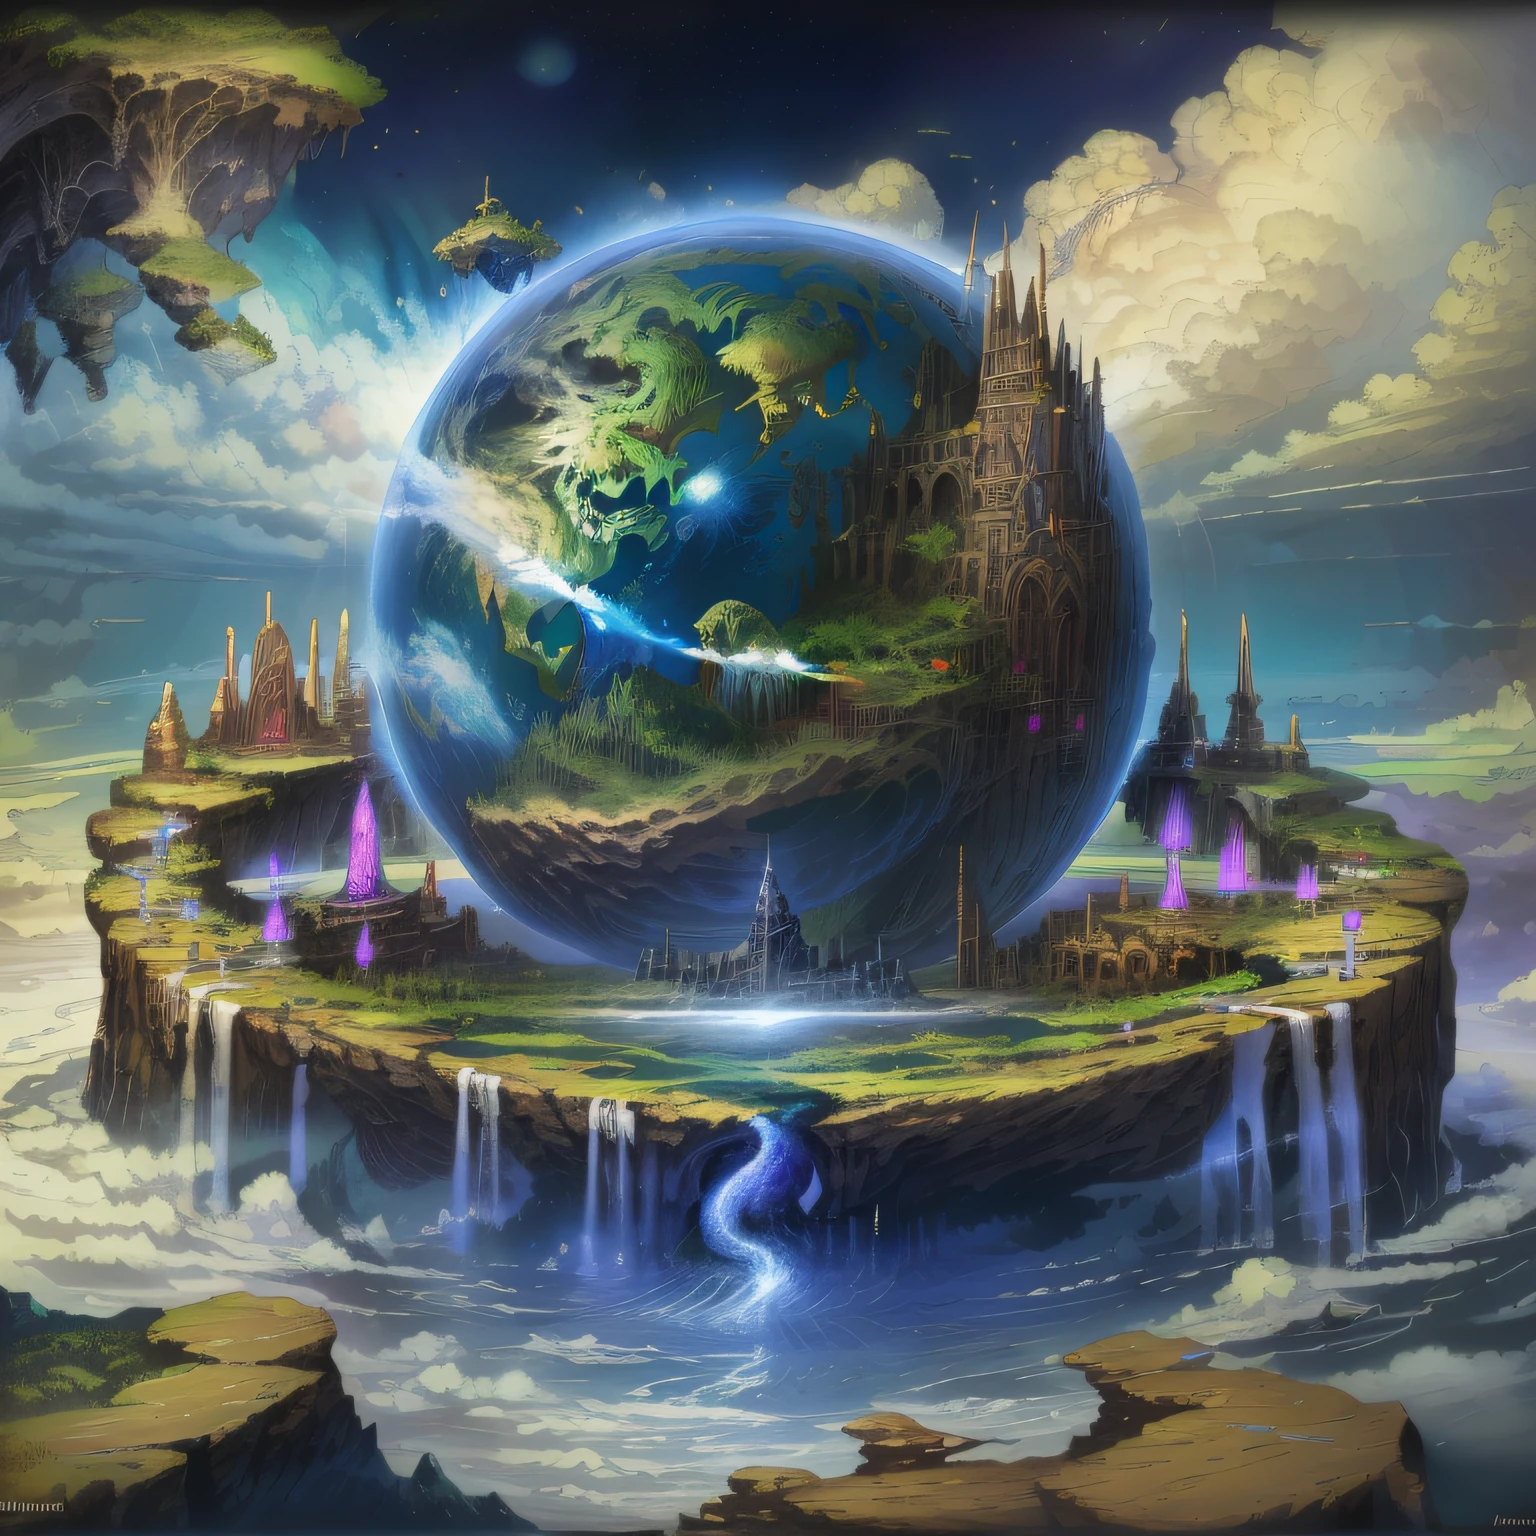 Creation of the dark fantasy world by the gods, principle, light, waters, heavens, earth, elements of nature